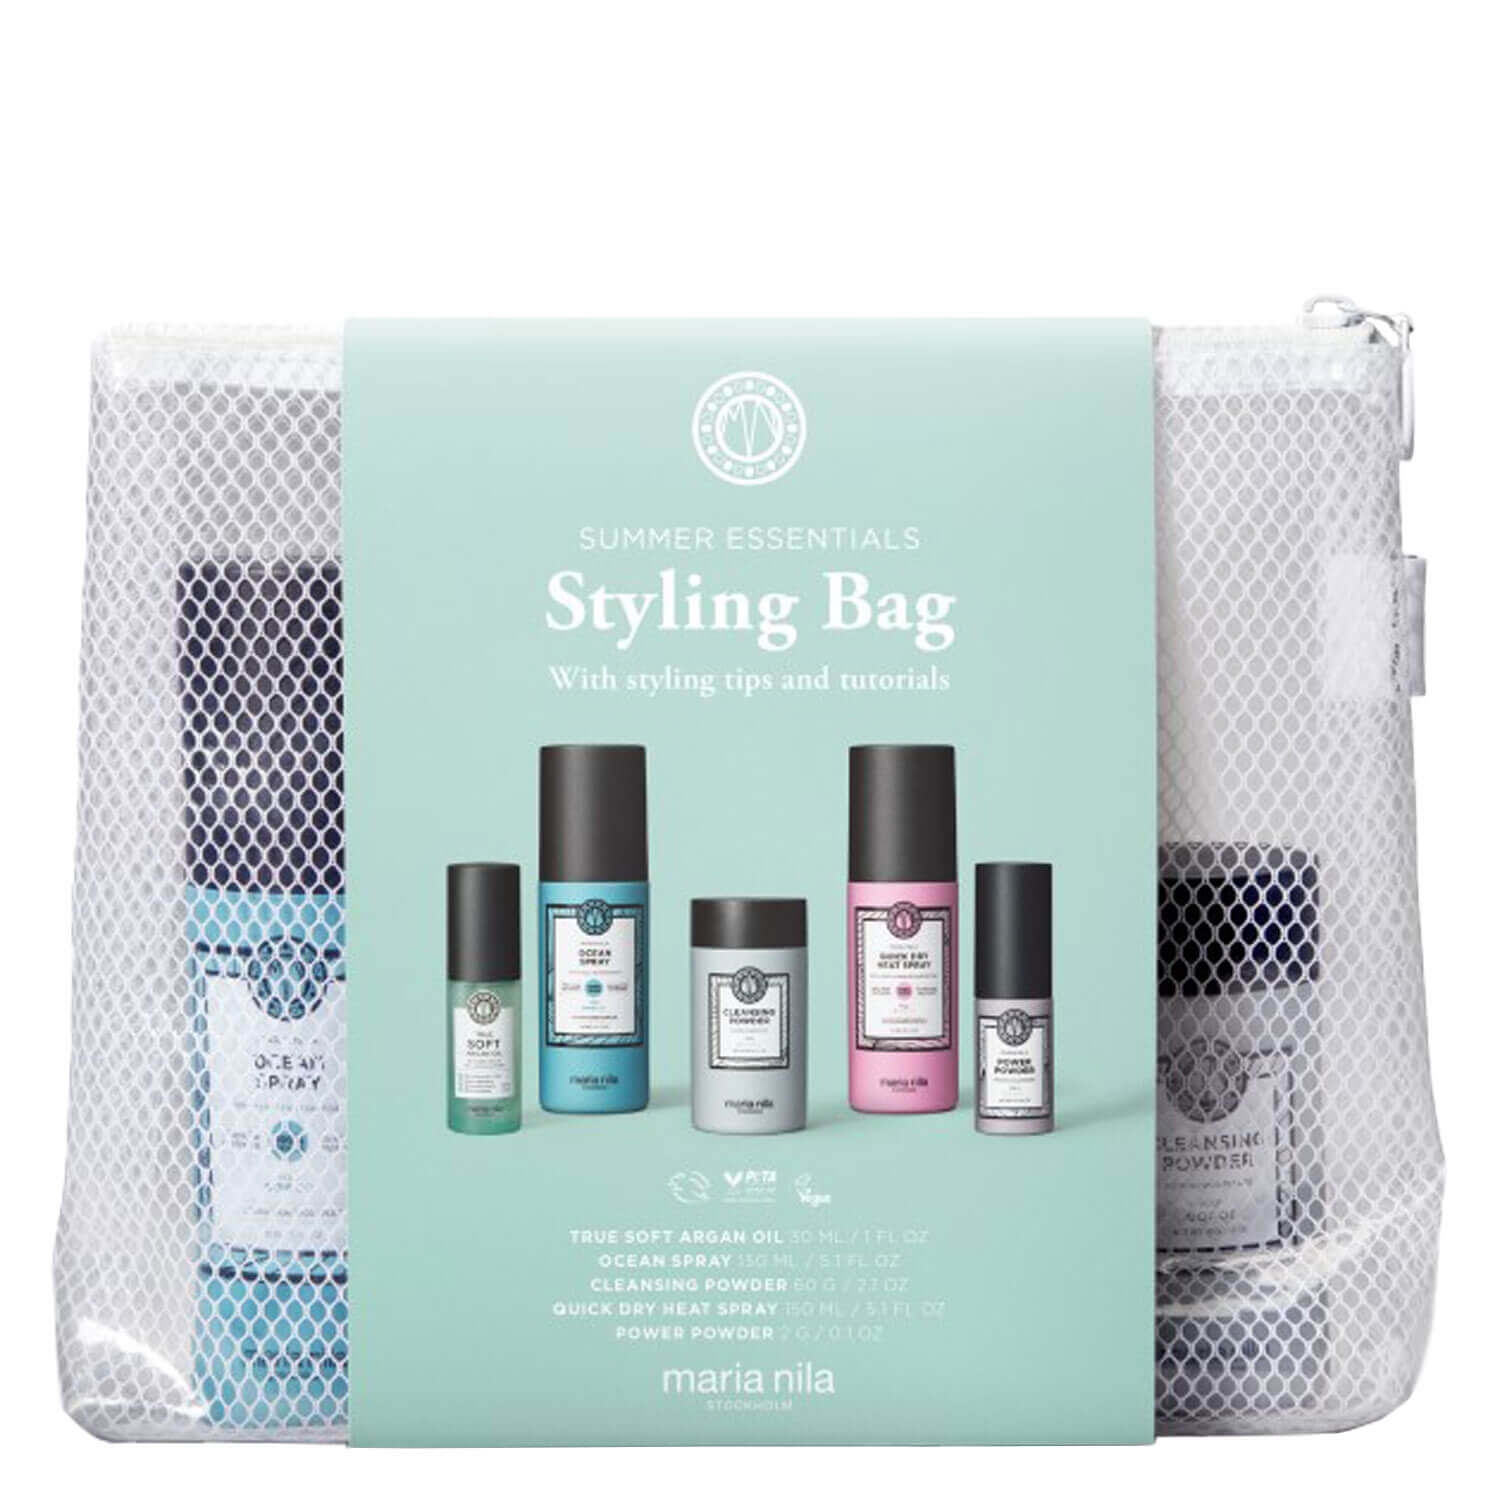 Product image from Care & Style - Styling Bag